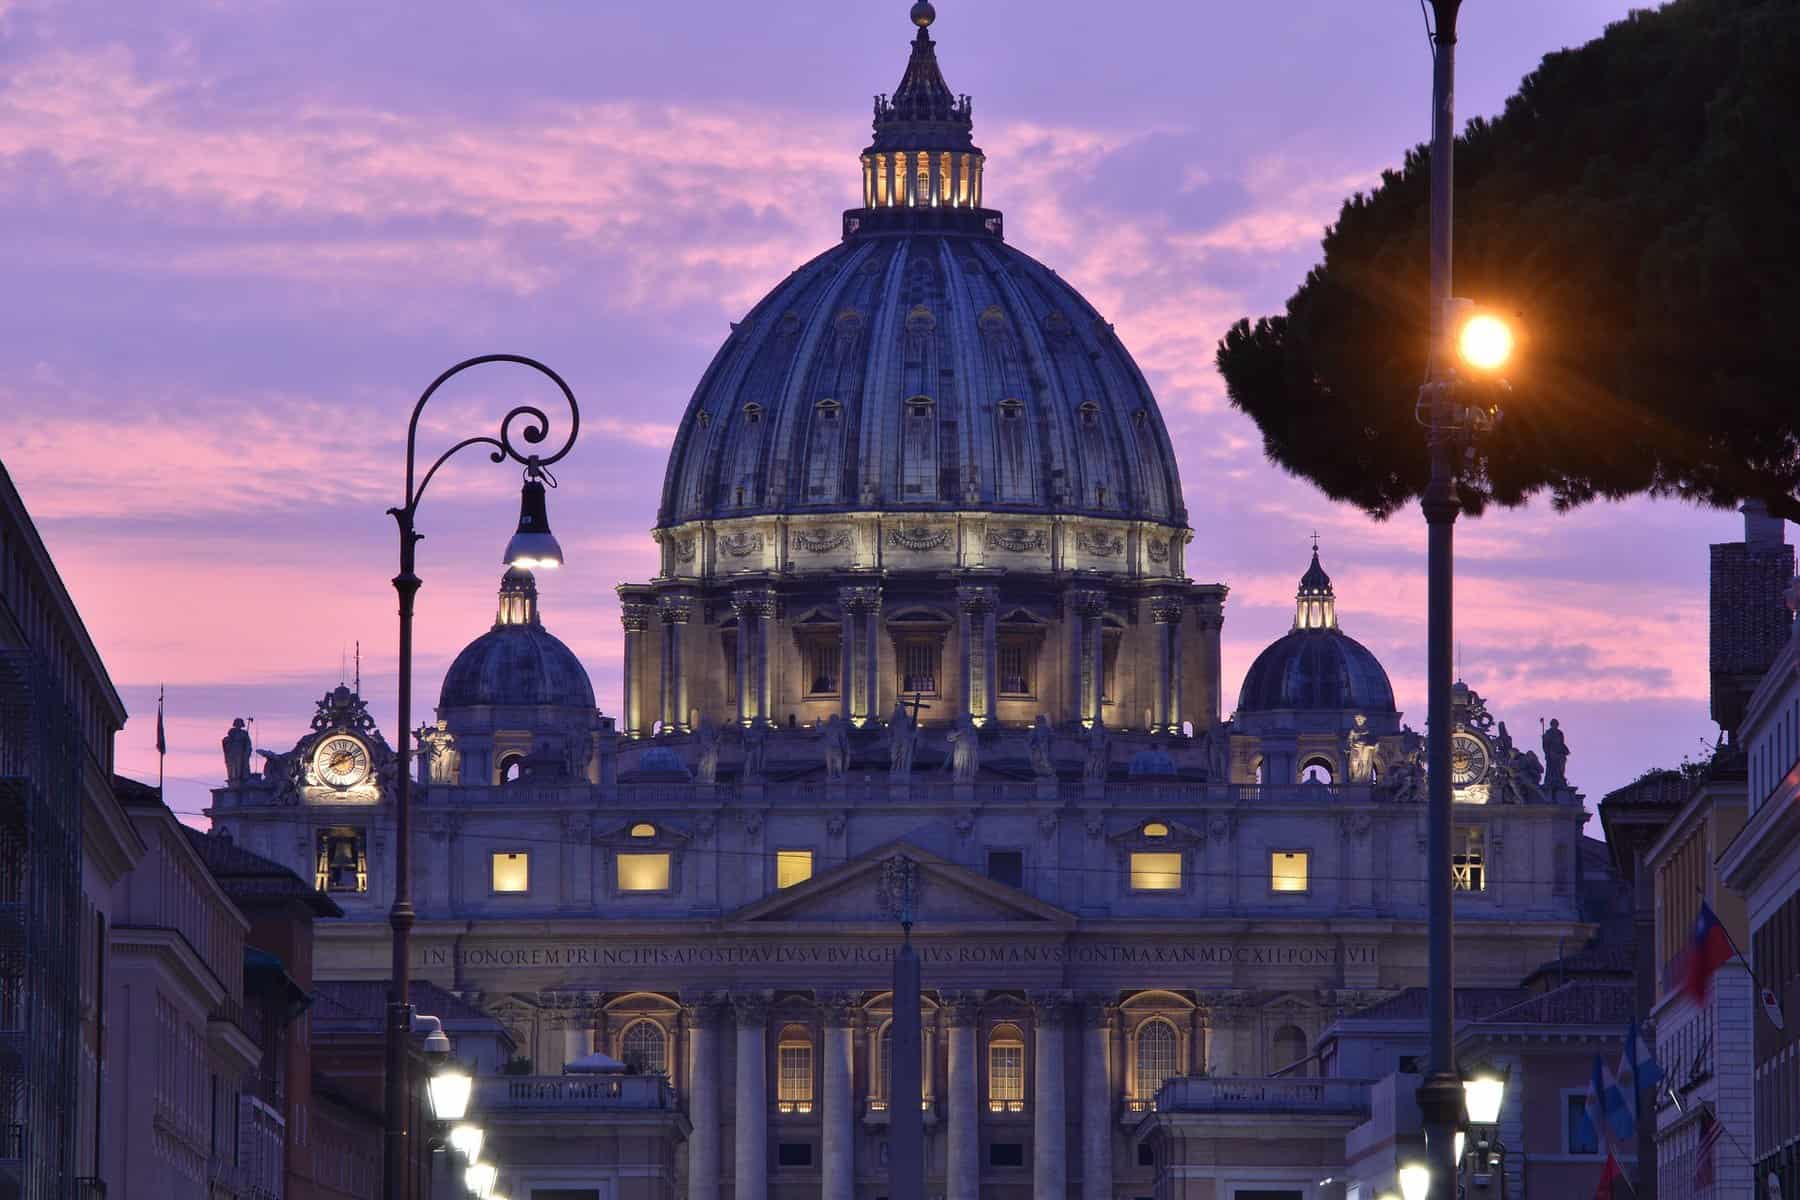 A lit dome in the Vatican is shown at sunset with pink and purple clouds behind it.